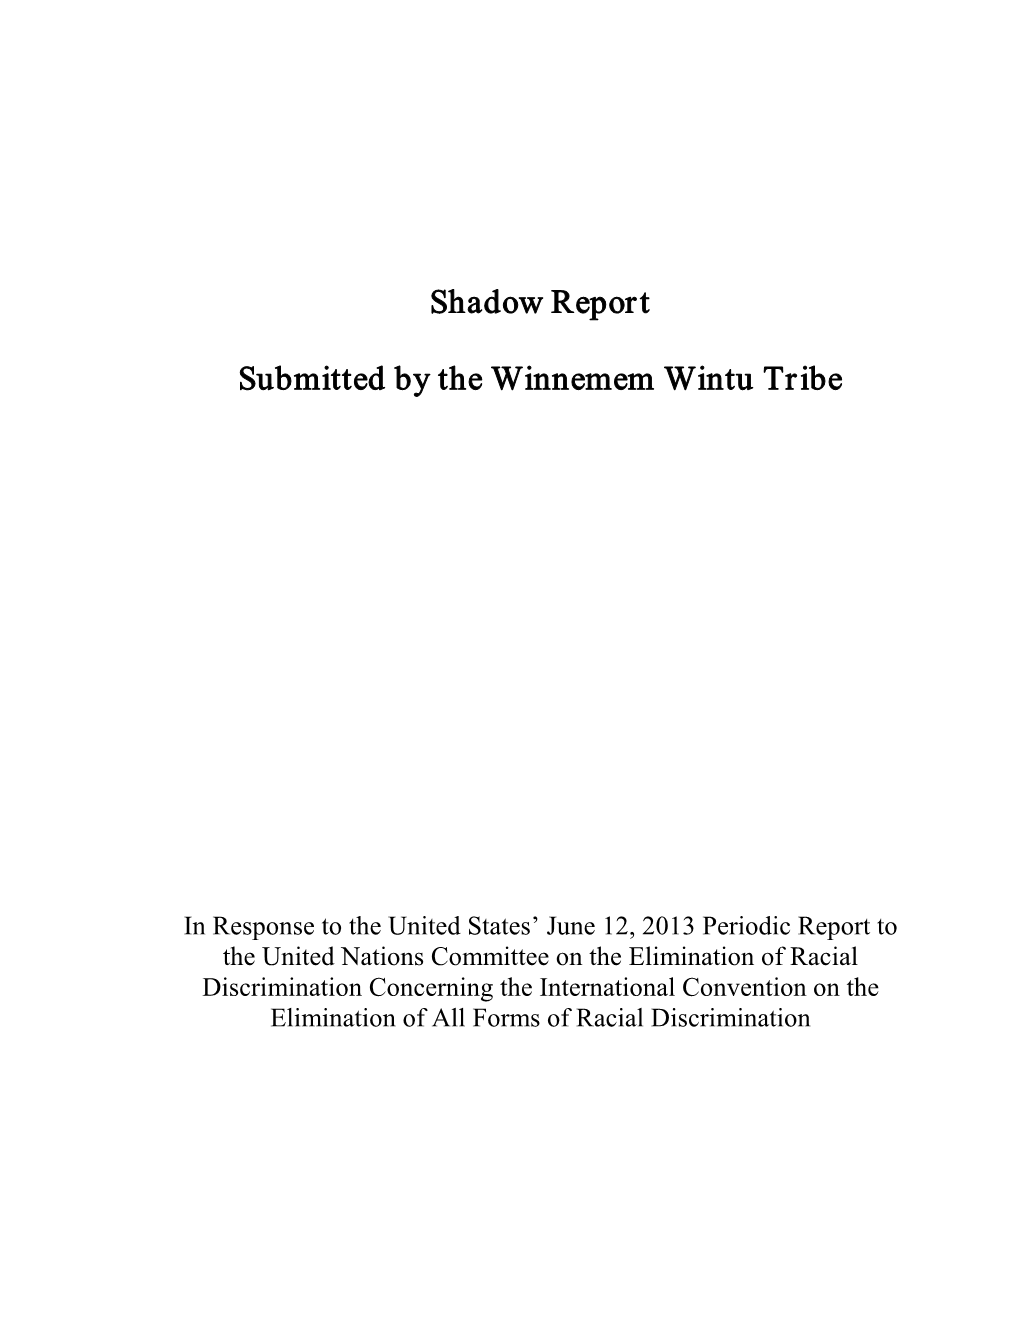 Shadow Report Submitted by the Winnemem Wintu Tribe